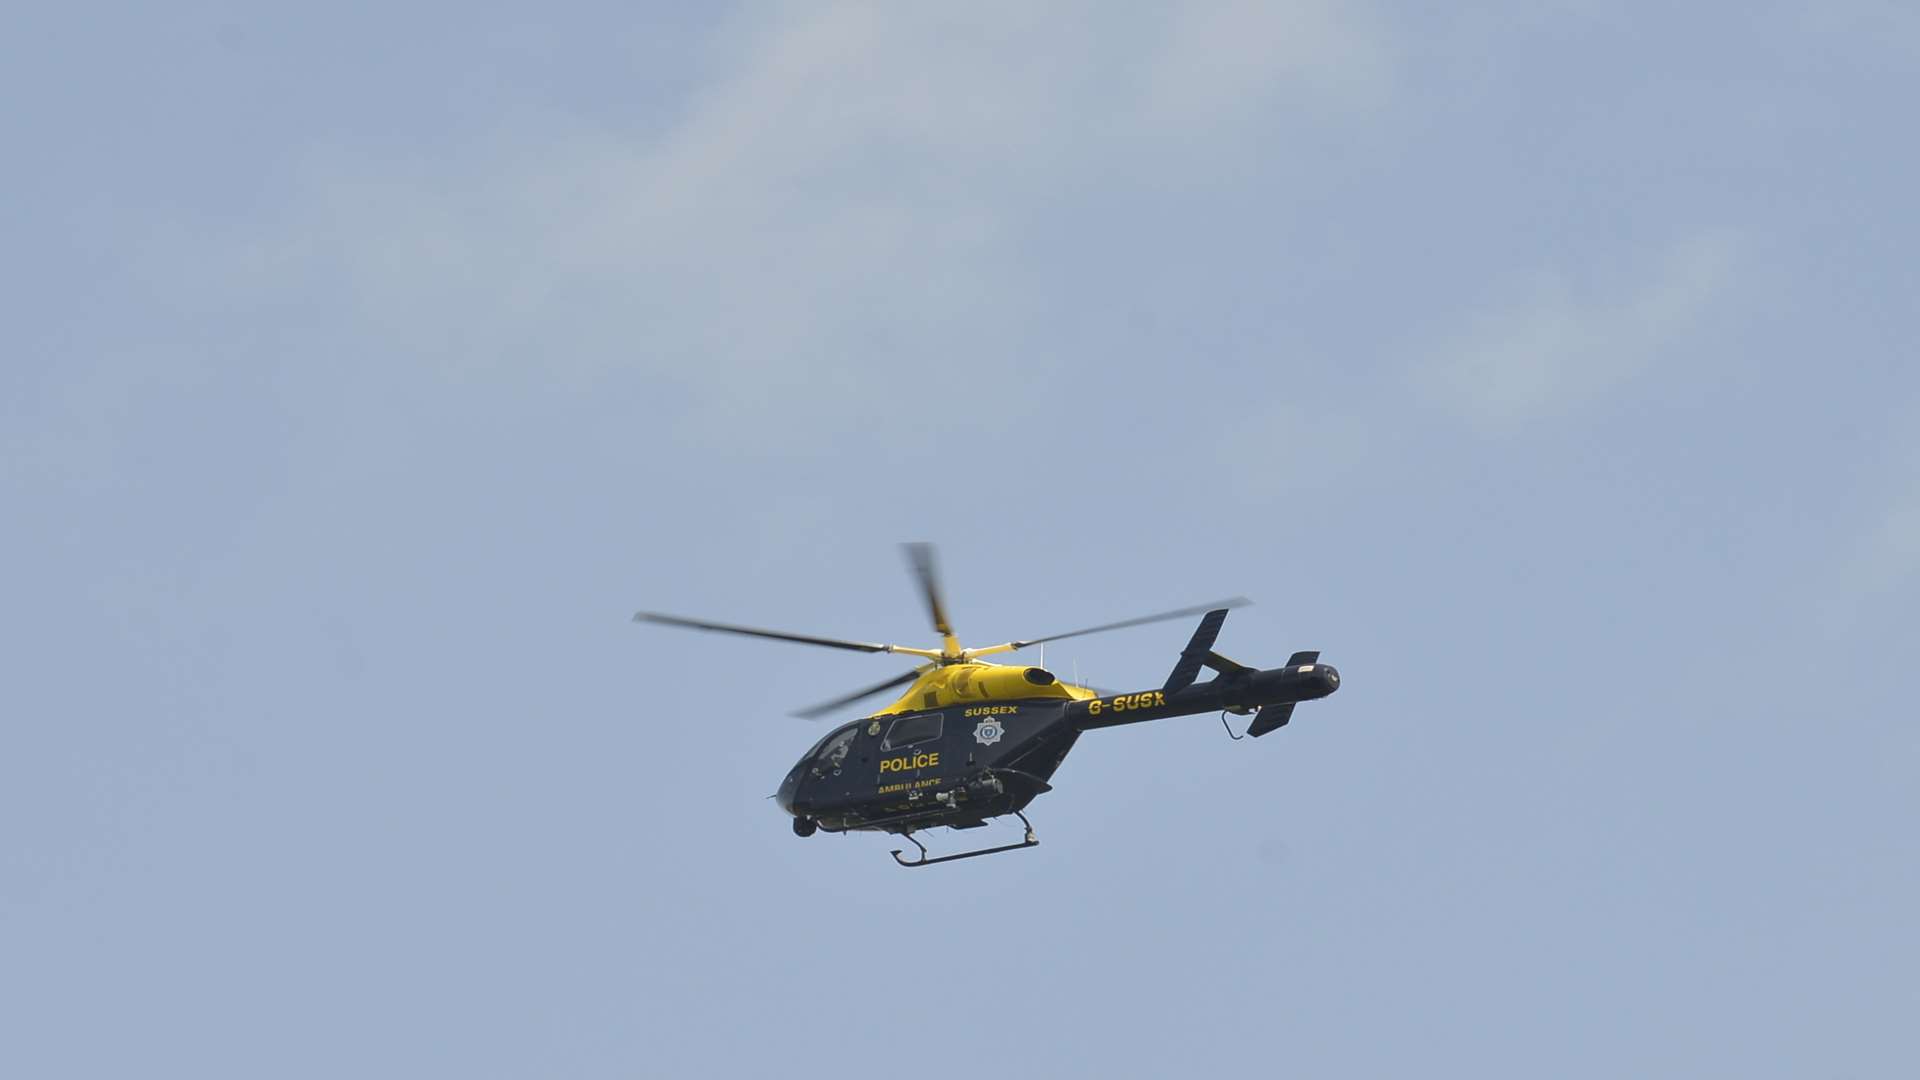 Police helicopter over town